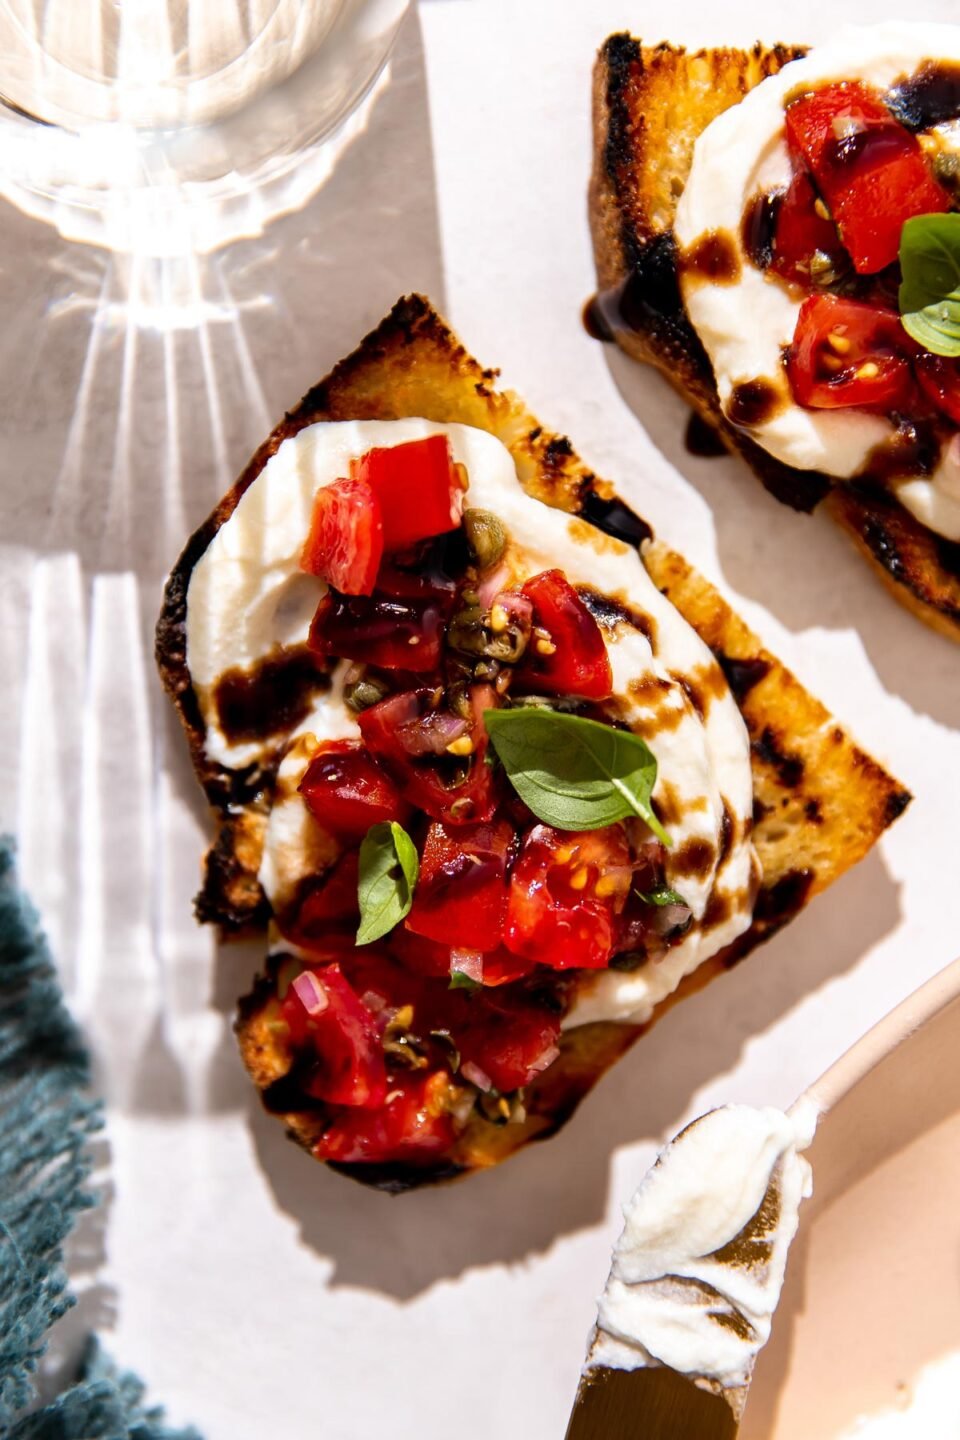 Two pieces of ricotta bruschetta served on grilled bread that sit atop a white textured surface. A blue linen napkin, a peach colored platter with a gold knife used to spread ricotta sitting atop, and a clear glass filled with white wine surround the two pieces of whipped ricotta bruschetta.